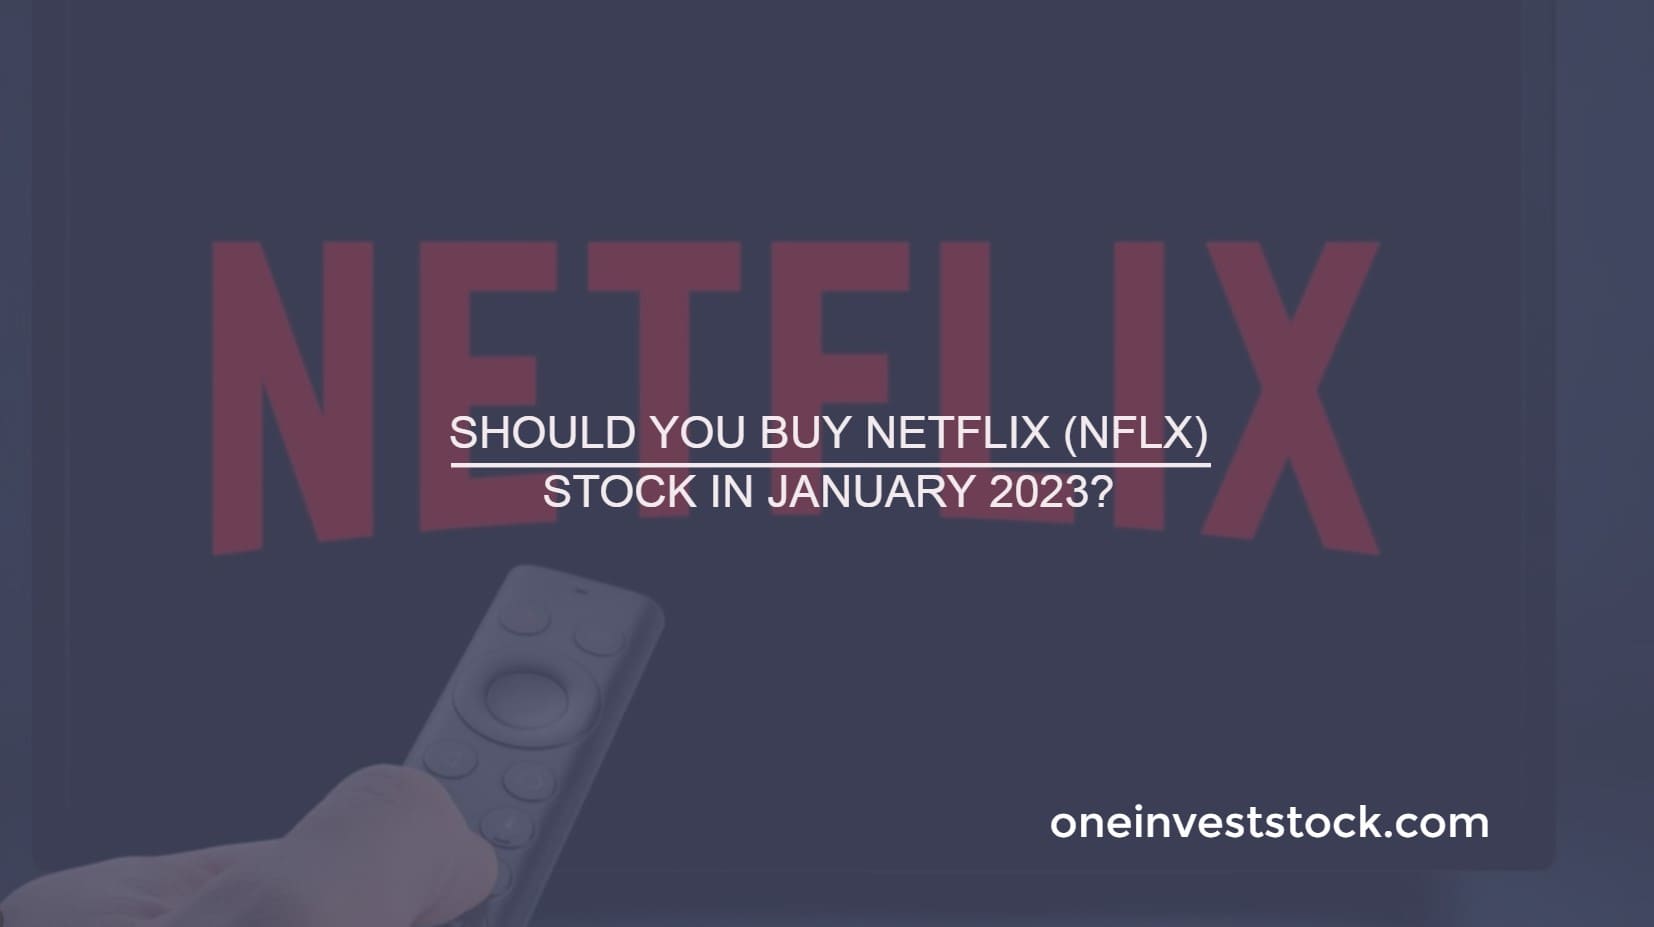 Should you buy Netflix (NFLX) stock in January 2023